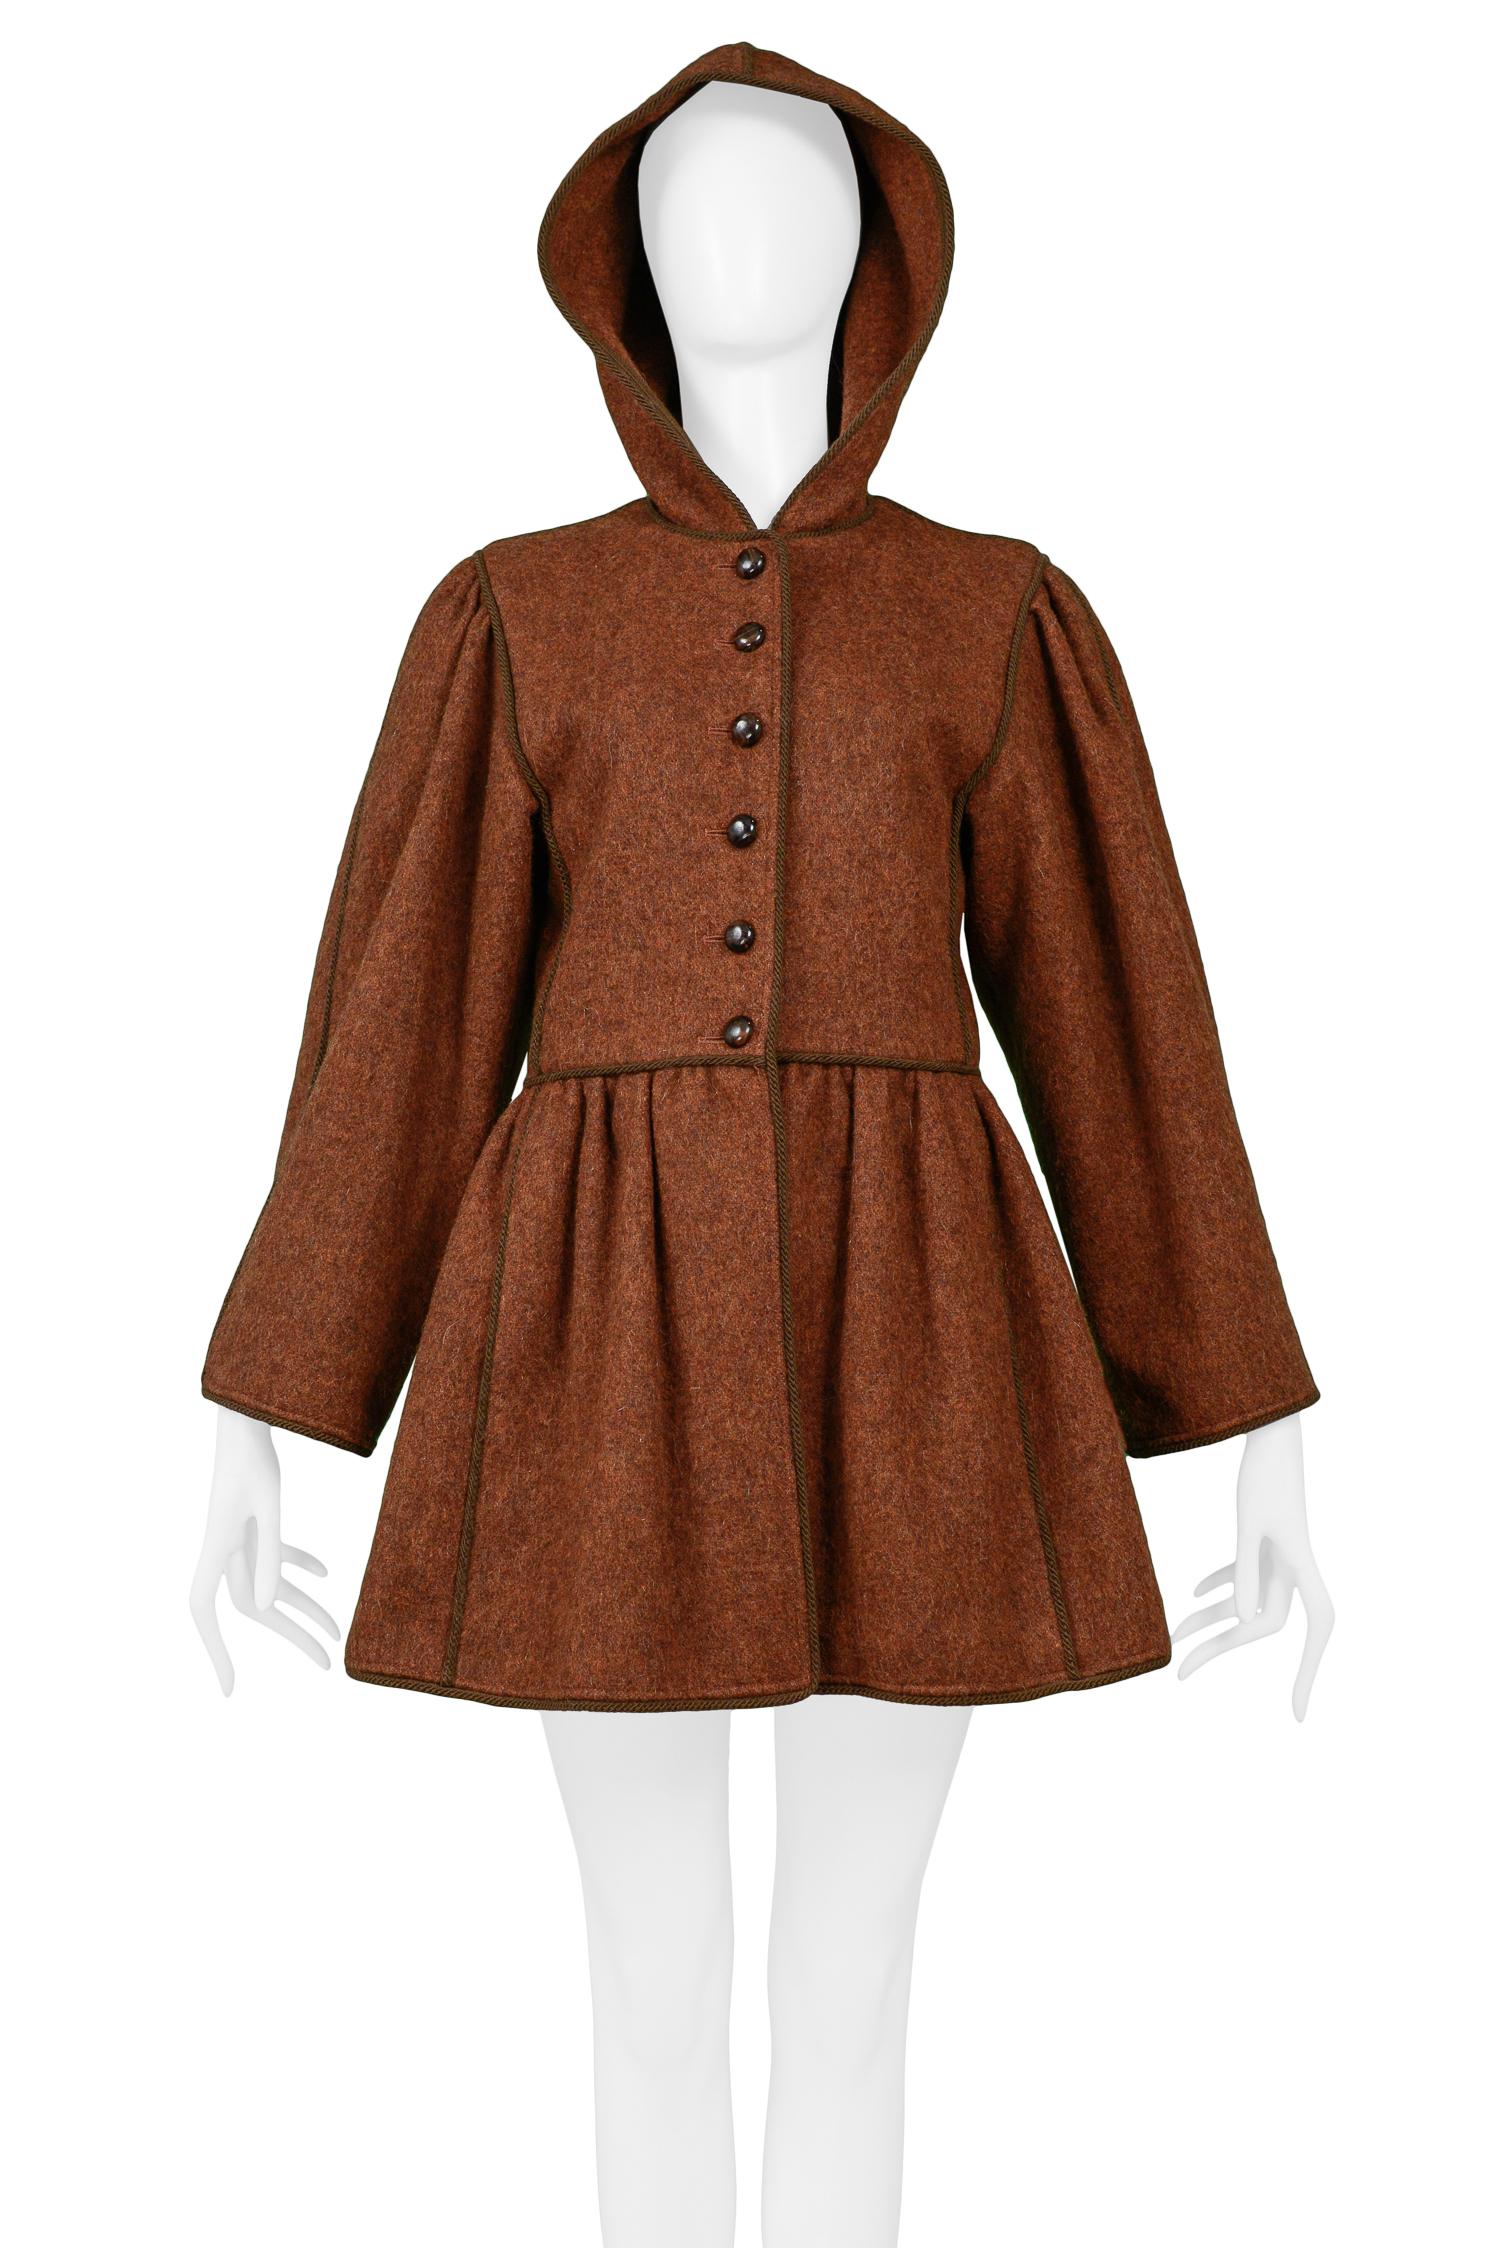 Vintage Yves Saint Laurent brown wool hooded coat from the Russian Collection featuring front button closure and tonal braided trim. Circa 1976-77.'

Size: 36

Excellent Condition. 